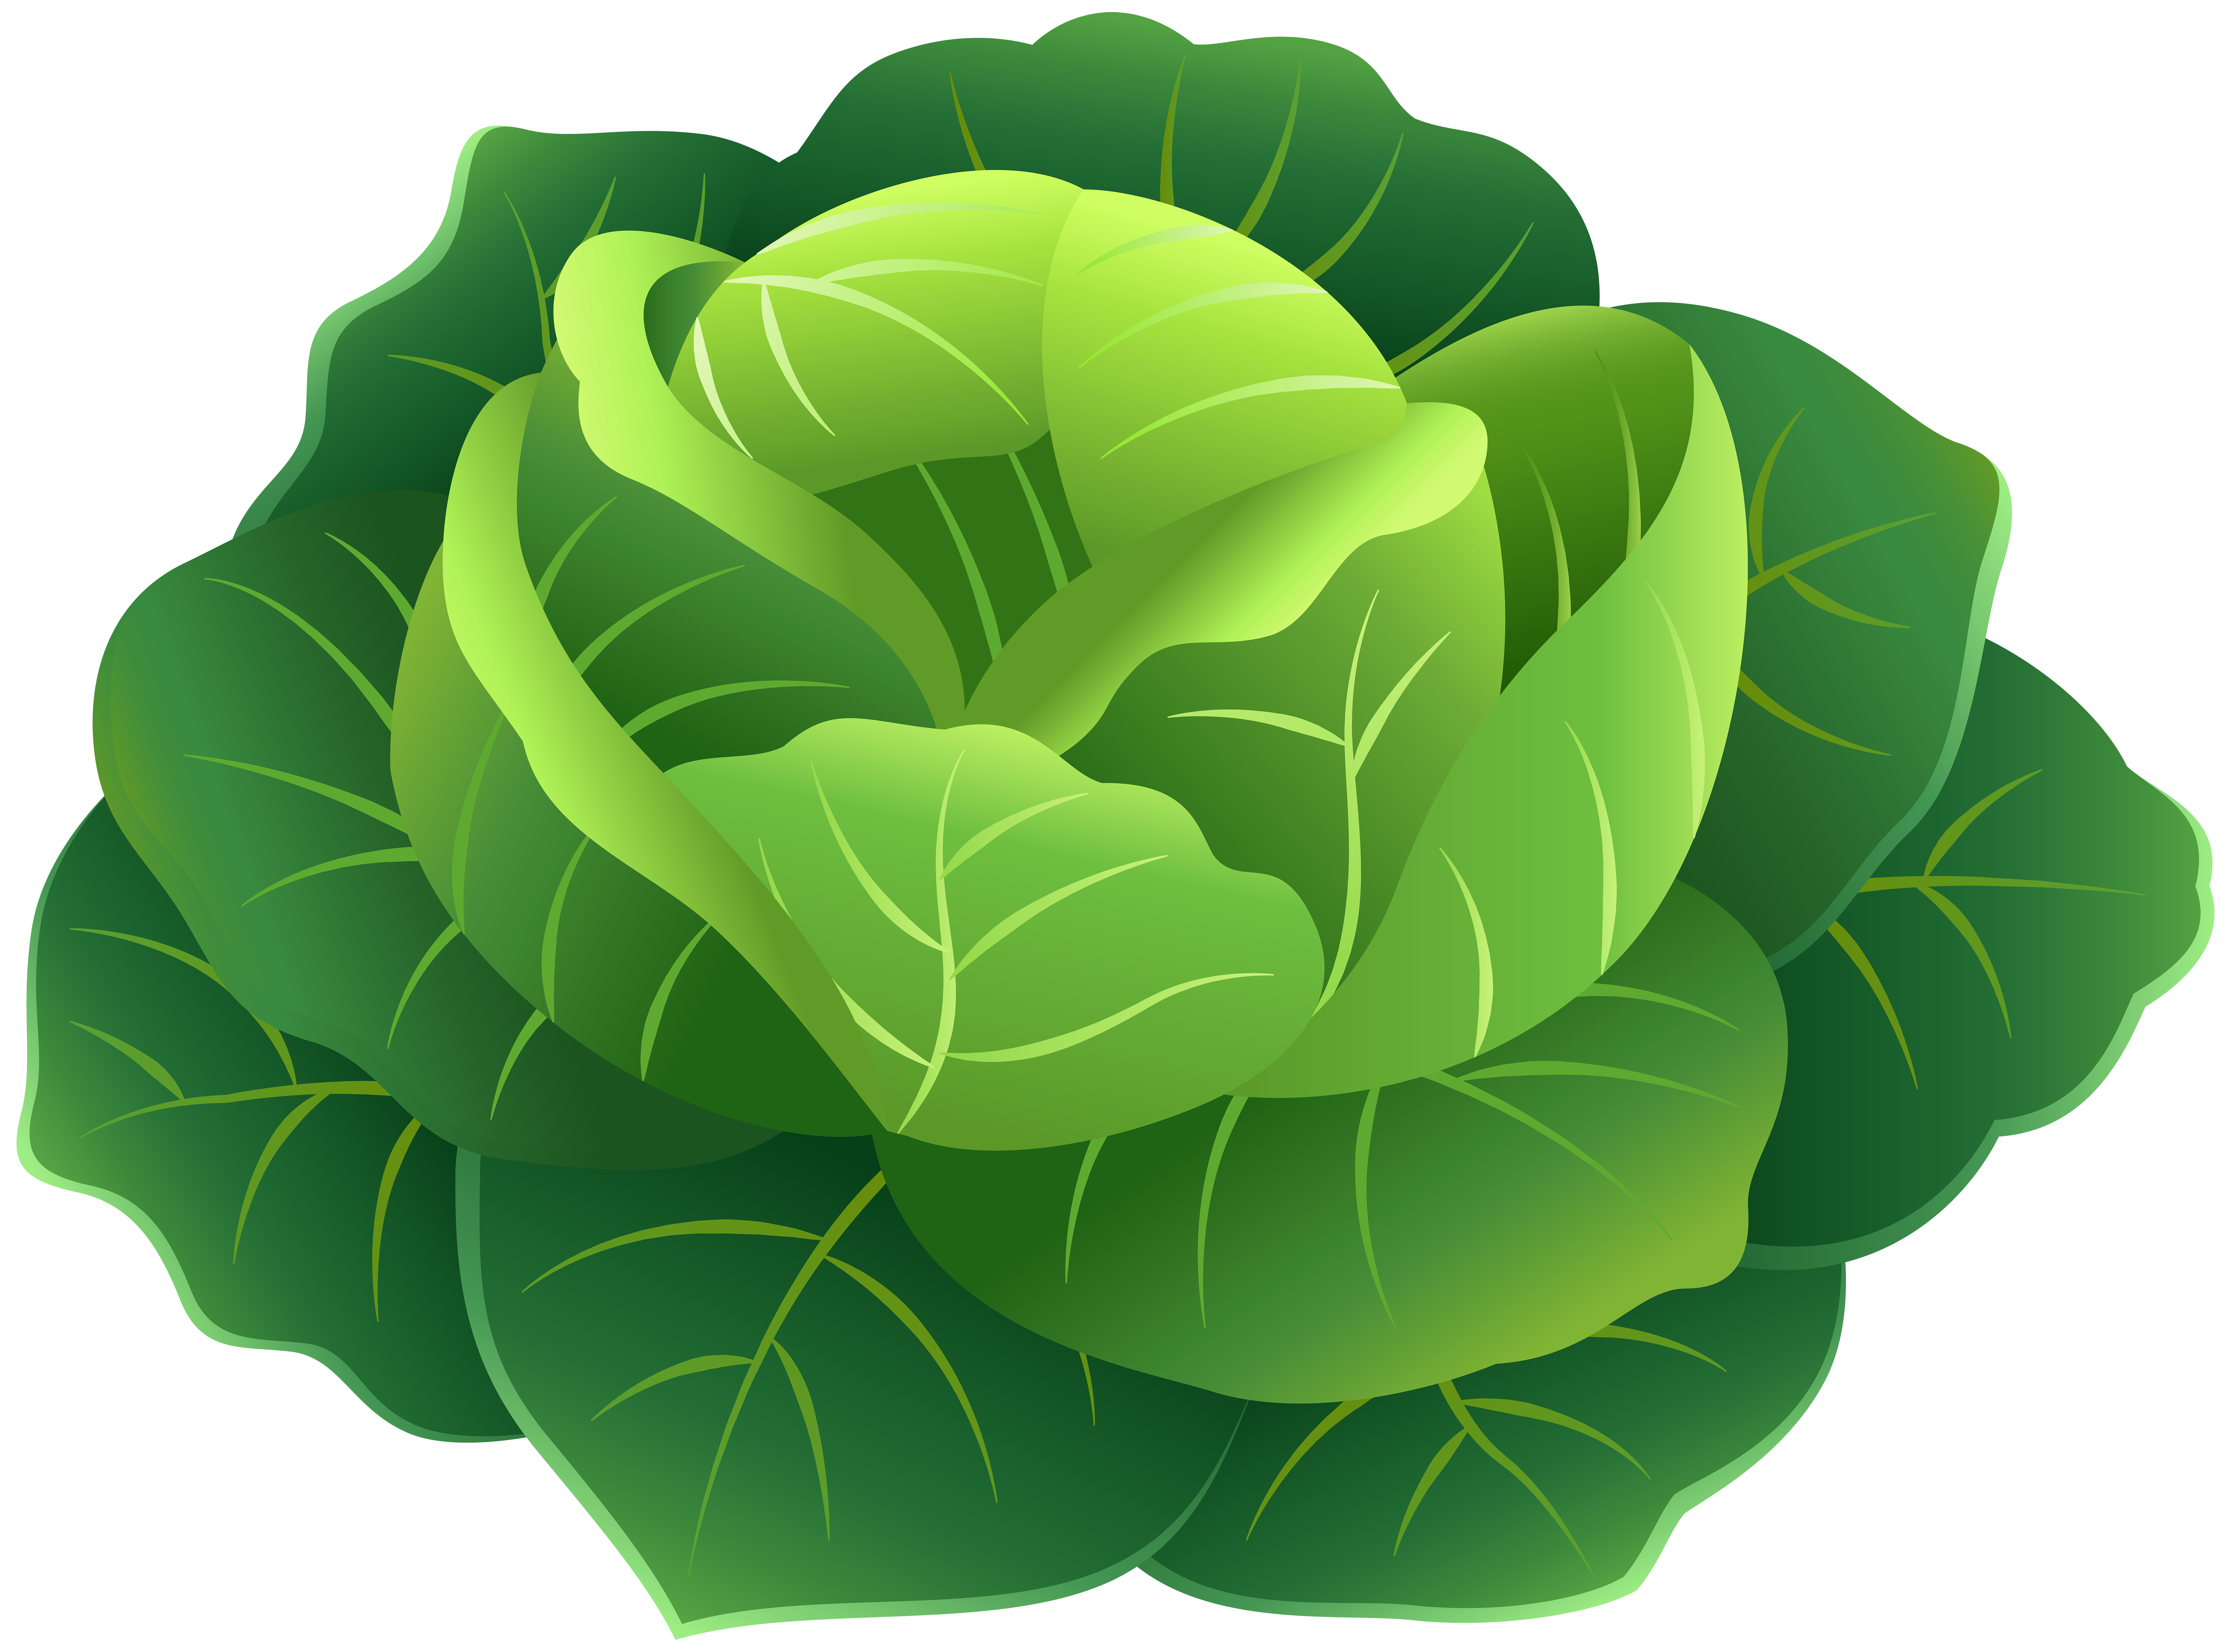 Cabbage PNG Clip Art Image.